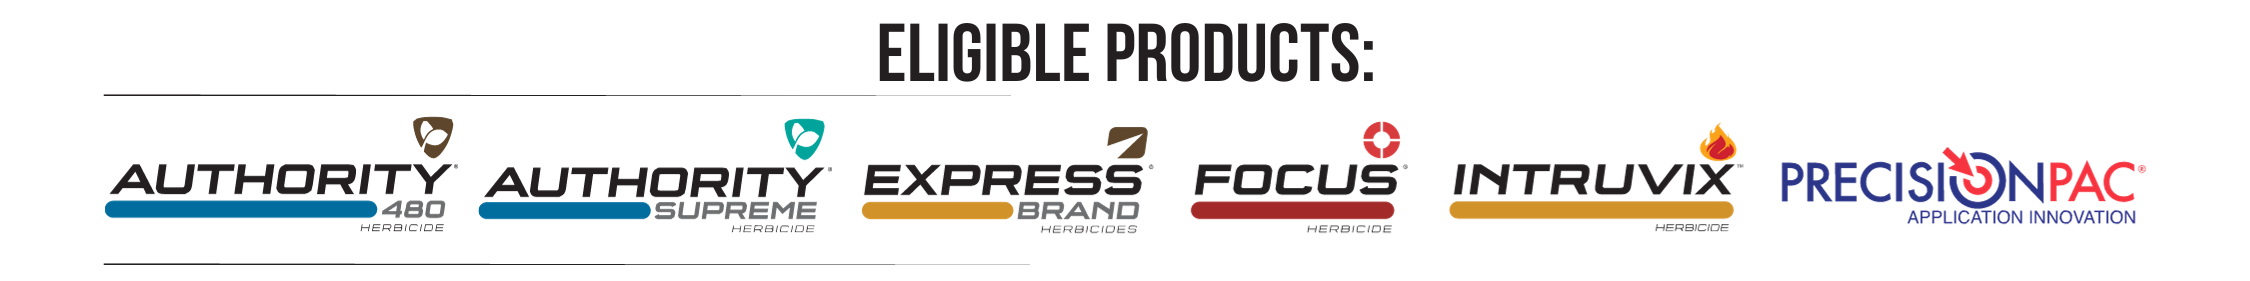 FMC-Eligible-Products